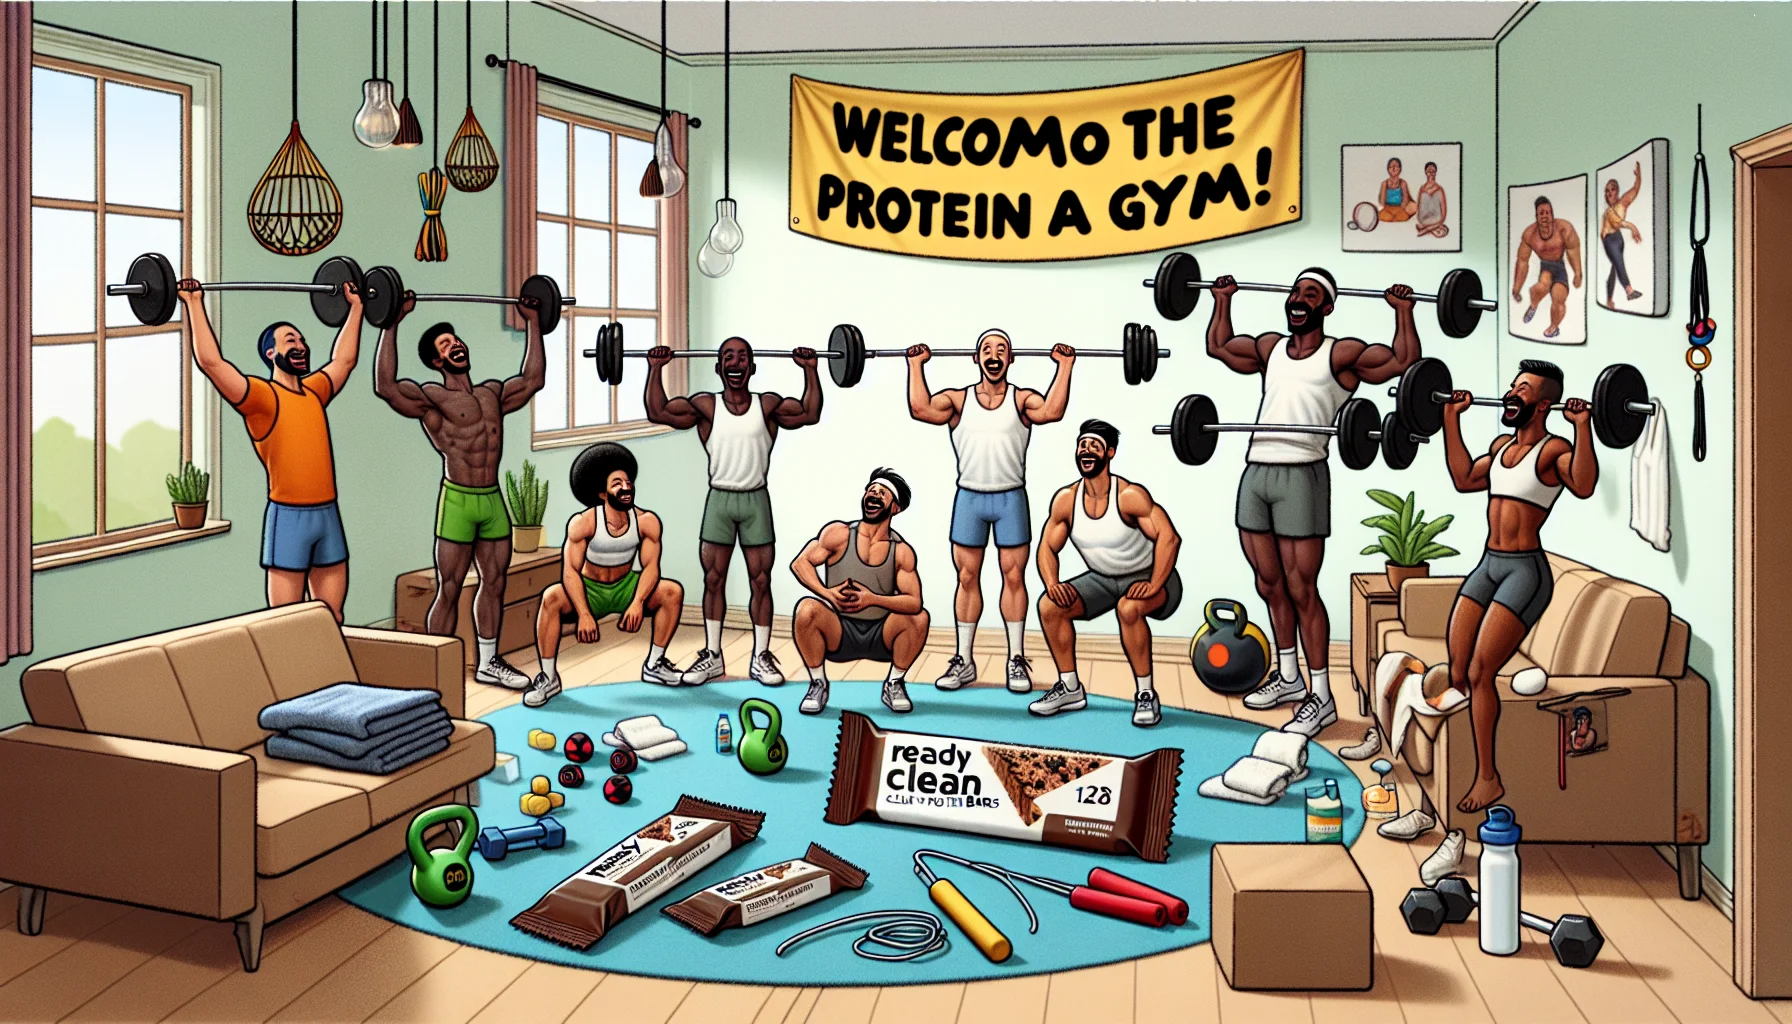 Imagine a humorous and enticing scene showing ready clean protein bars. The protein bars are a highlight of a sports gear party, playfully arranged like weights at the edge of a makeshift gym created in a comfortable home setting. Next to them, there's a makeshift sports setup including jump ropes, kettlebells, and yoga mats. Hanging on the wall is a banner that reads, 'Welcome to the Protein Bar Gym!'. The sports enthusiasts of various professions, ages, genders, and descents are cheerfully engaged, lifting the protein bars as if they are weights and laughing. Make sure to represent a diverse range of people such as a Black female coach, an Hispanic male athlete, a Middle-Eastern female gymnast, a South Asian male bodybuilder, and a White female yoga practitioner exploring the healthy supplement avenue for sports.